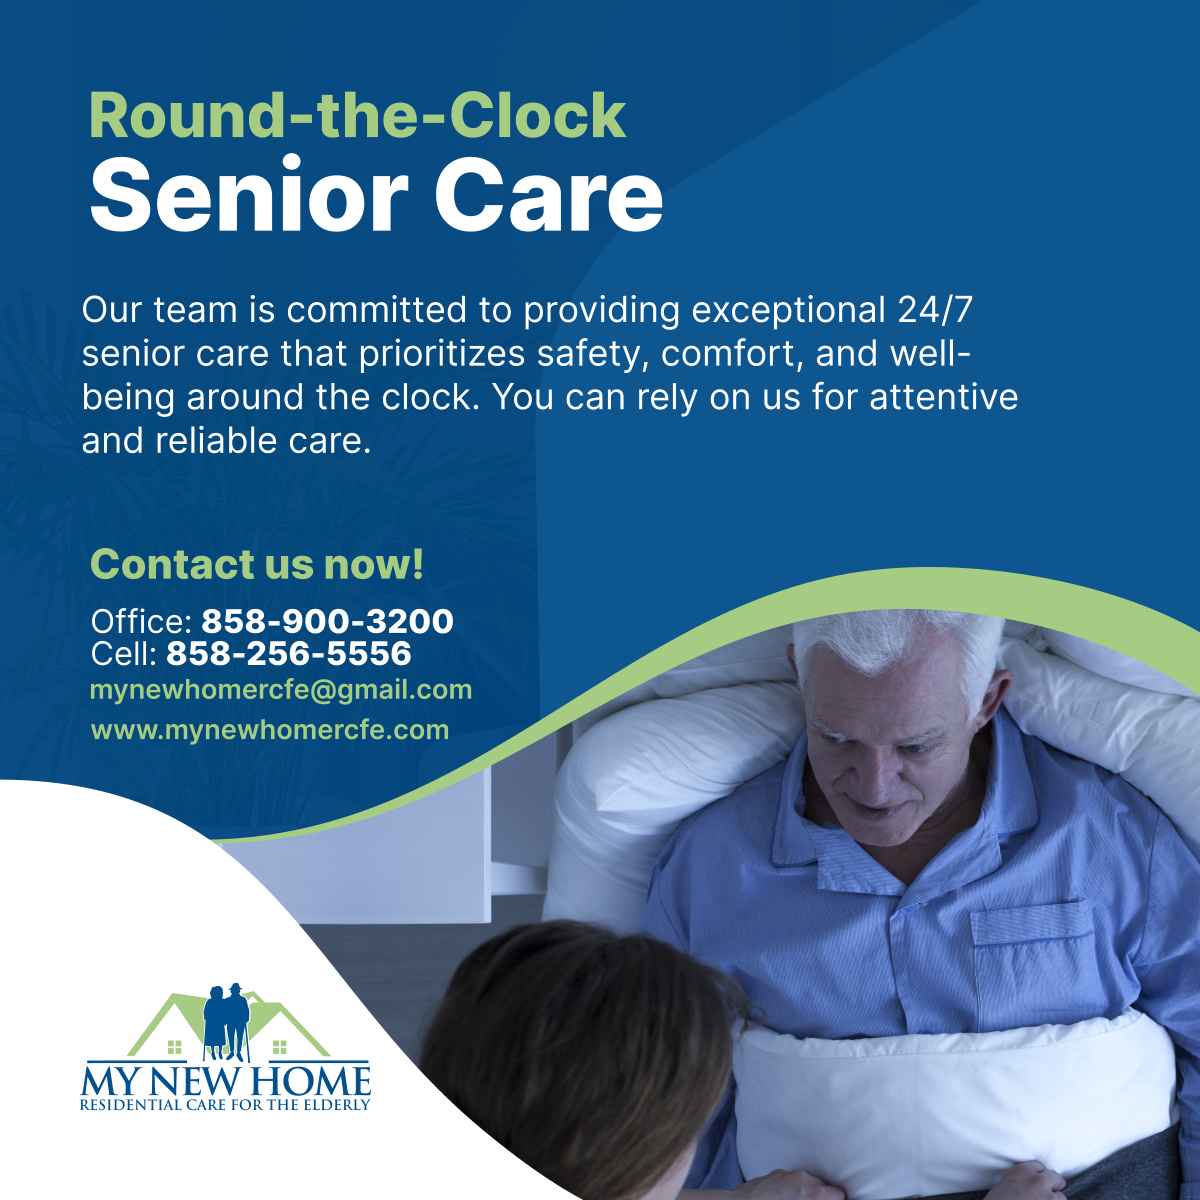 Experience peace of mind with our round-the-clock senior care. We're here every hour, every day, prioritizing your loved one's safety and comfort.

#SanDiegoCA #RoundTheClockCare #AssistedLivingHome